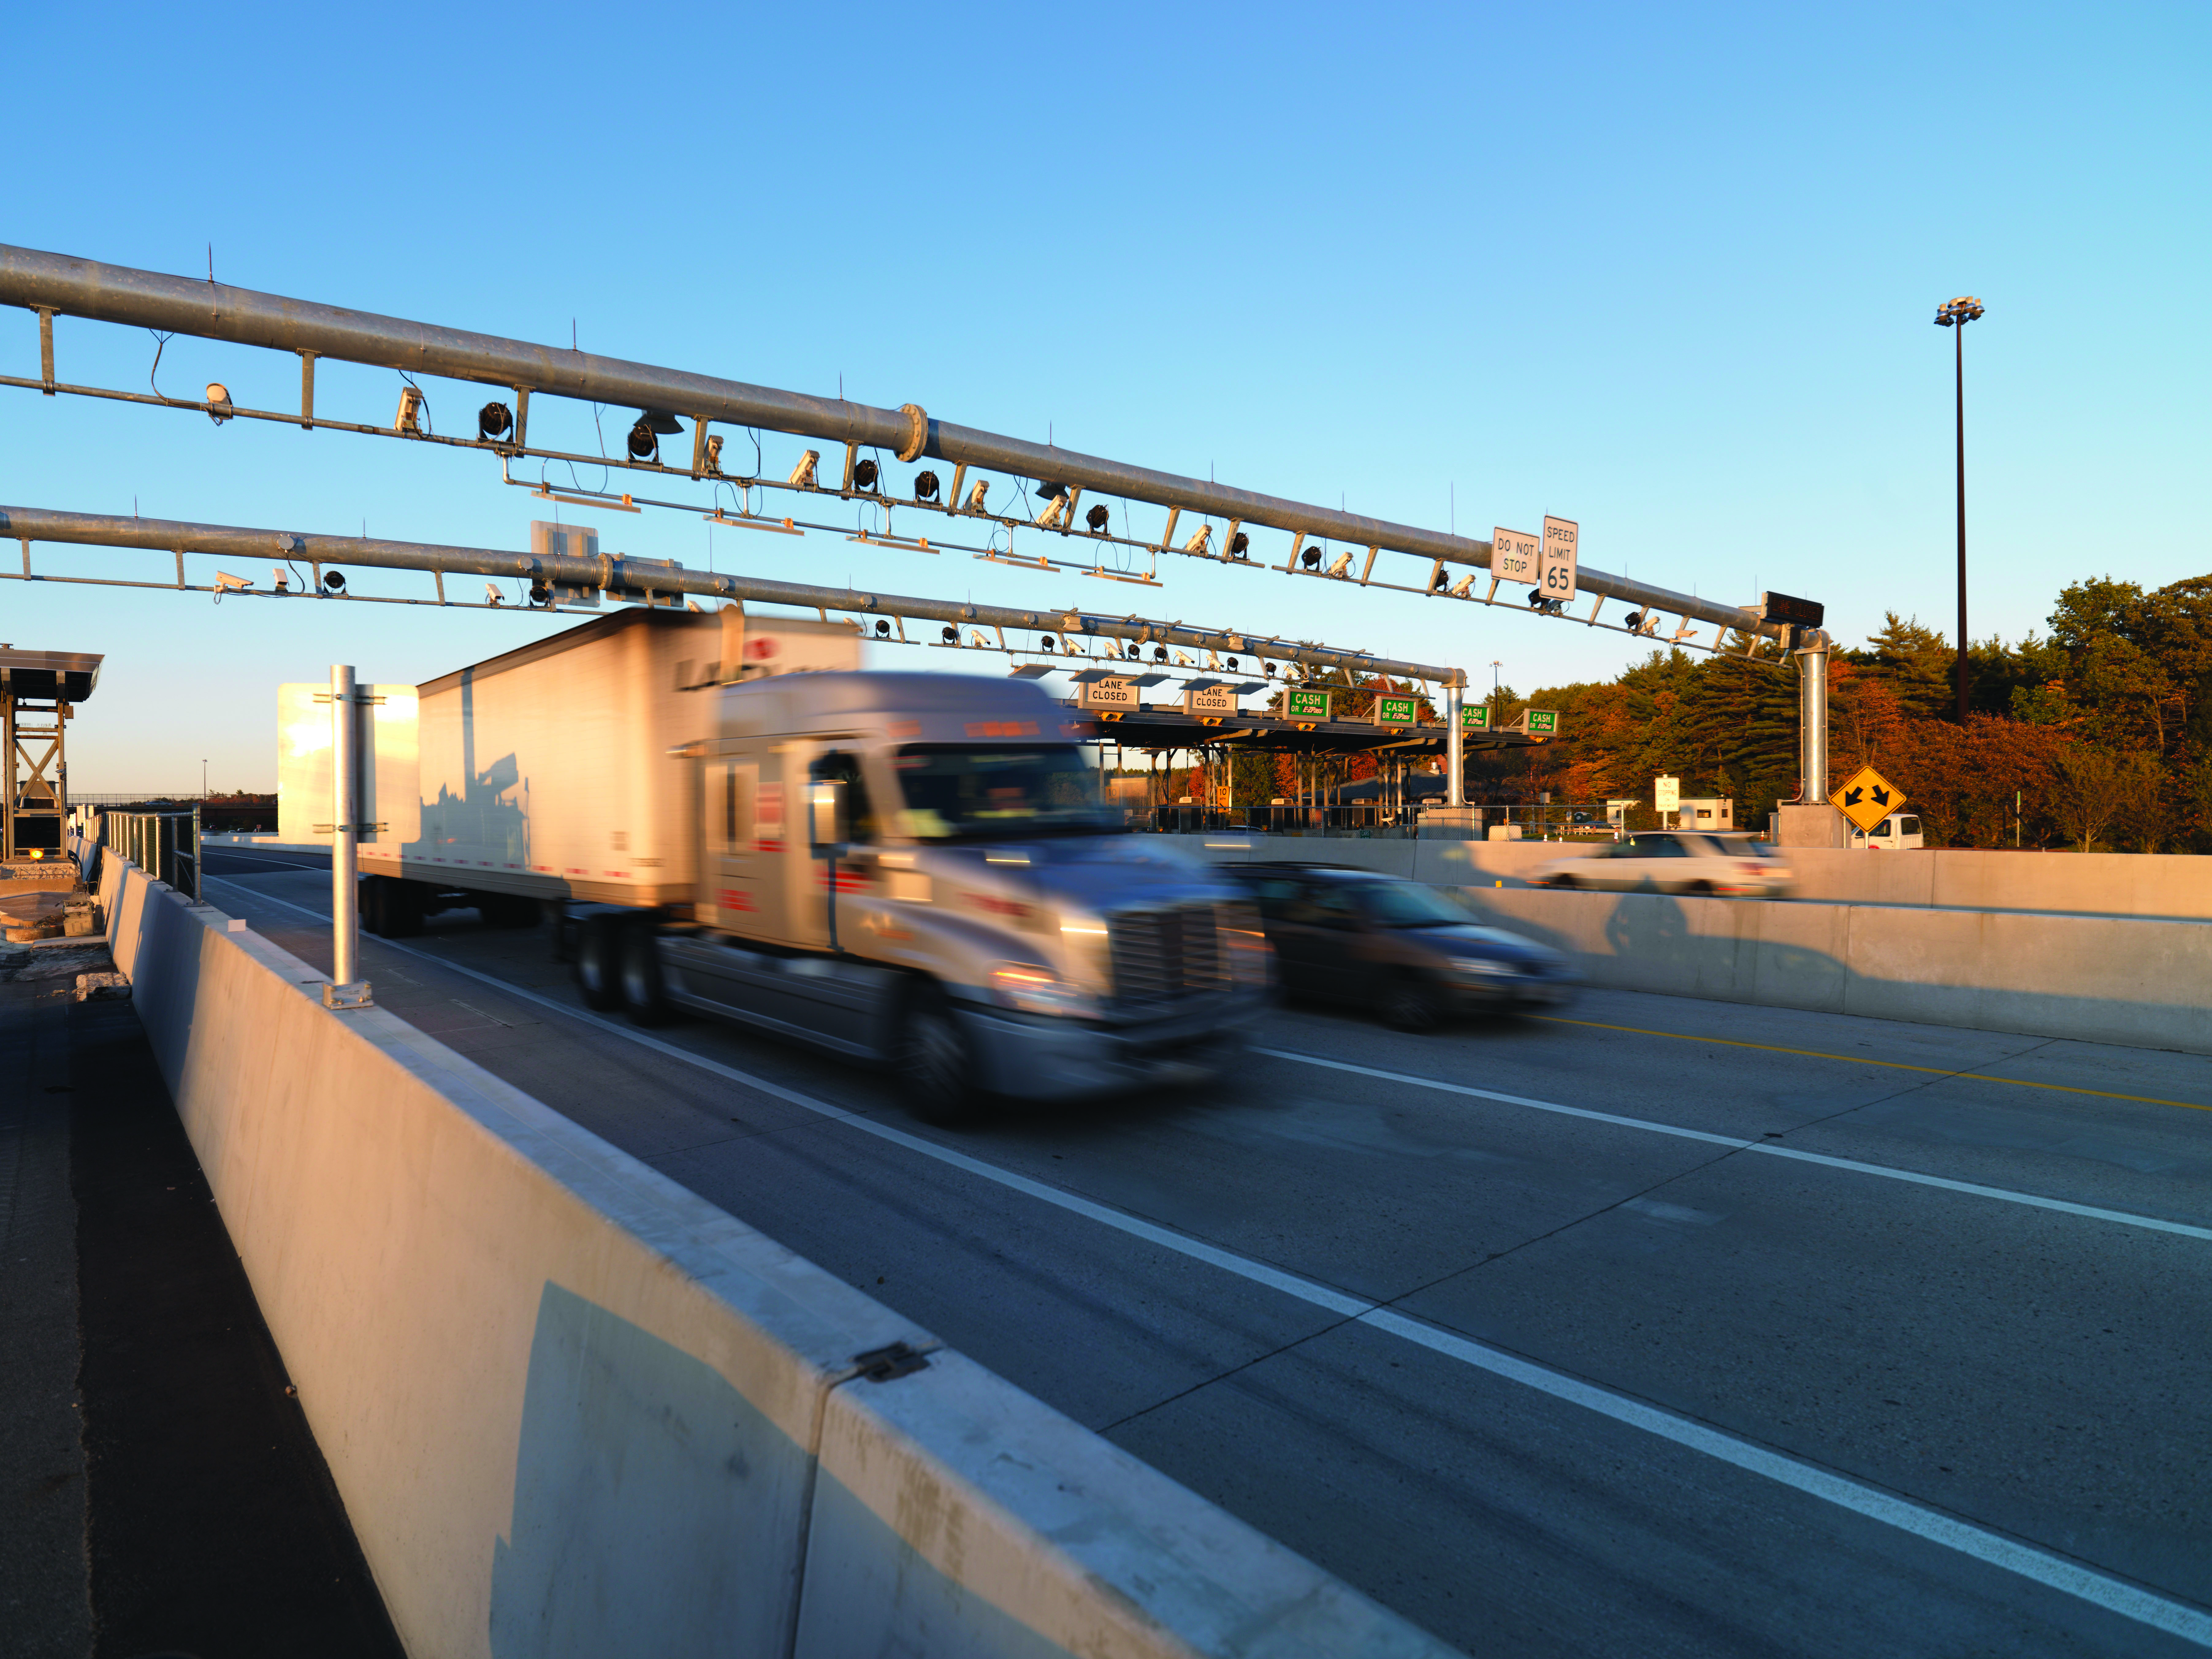 Truckers benefit from electronic tolling